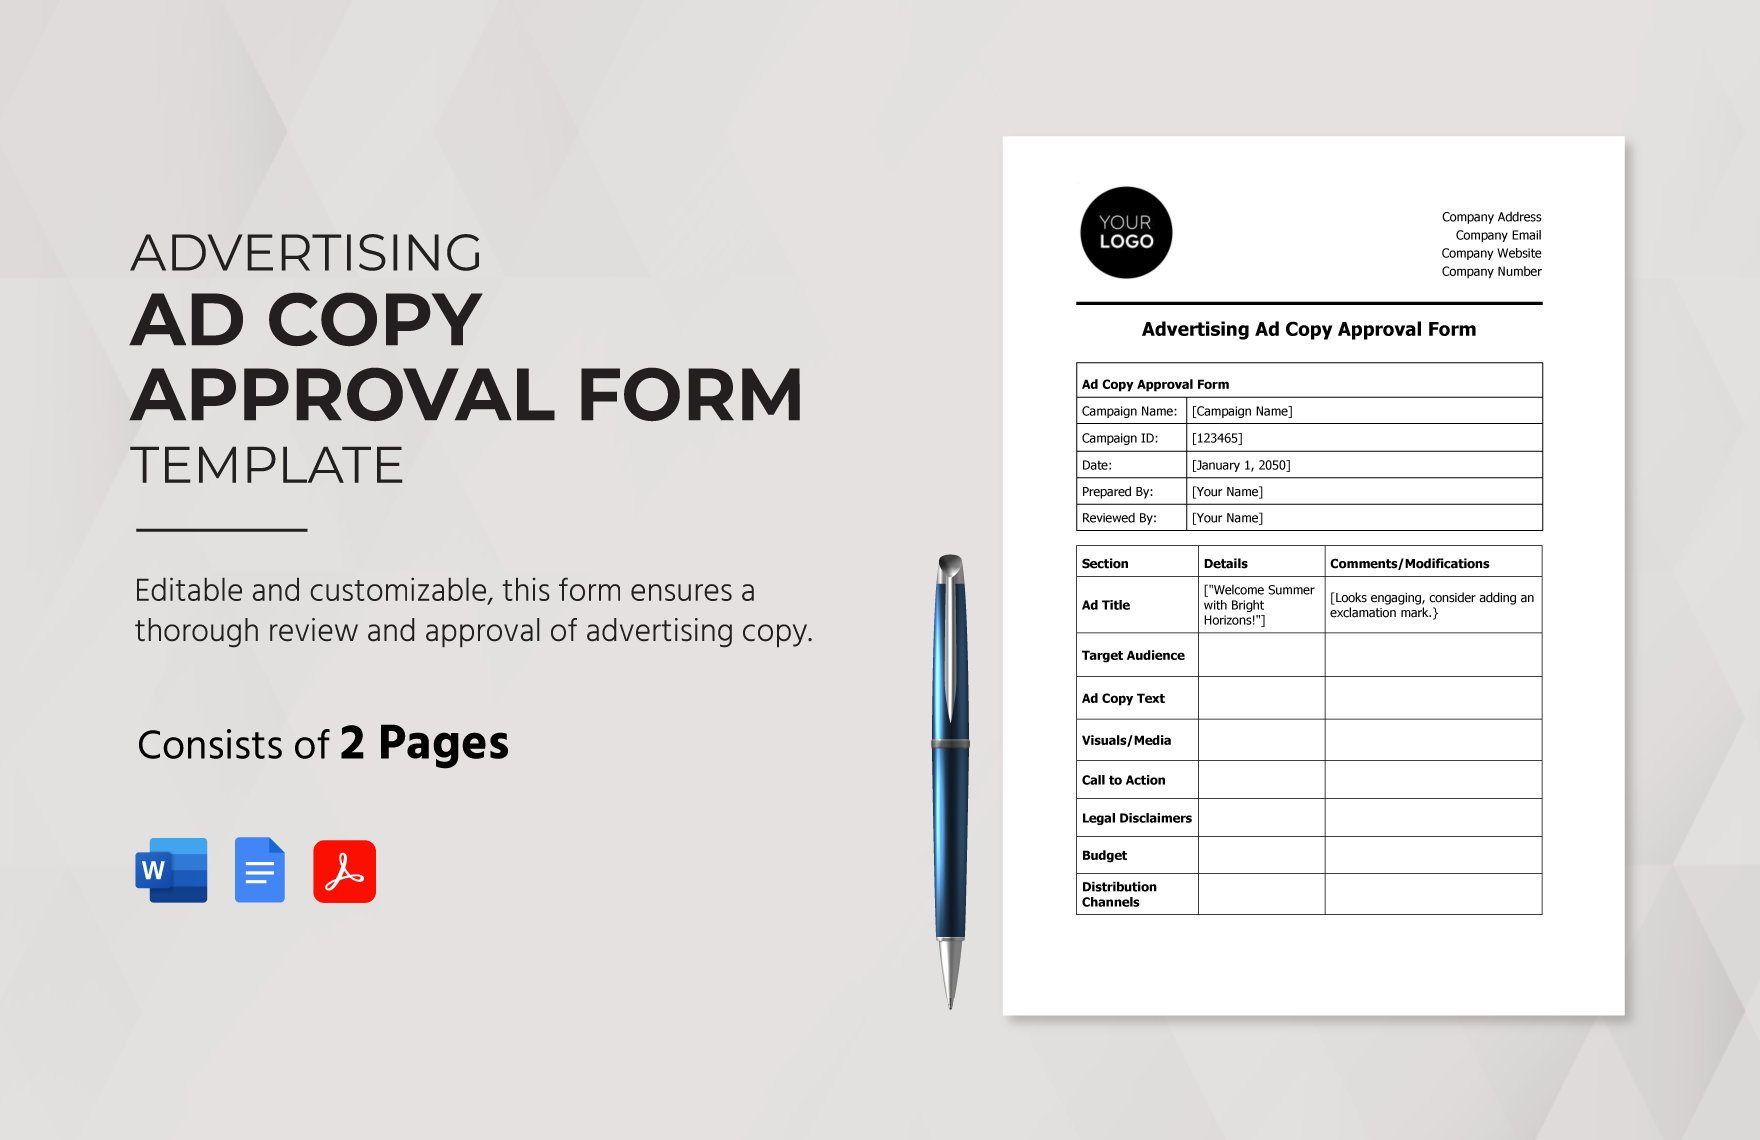 Advertising Ad Copy Approval Form Template in Word, Google Docs, PDF